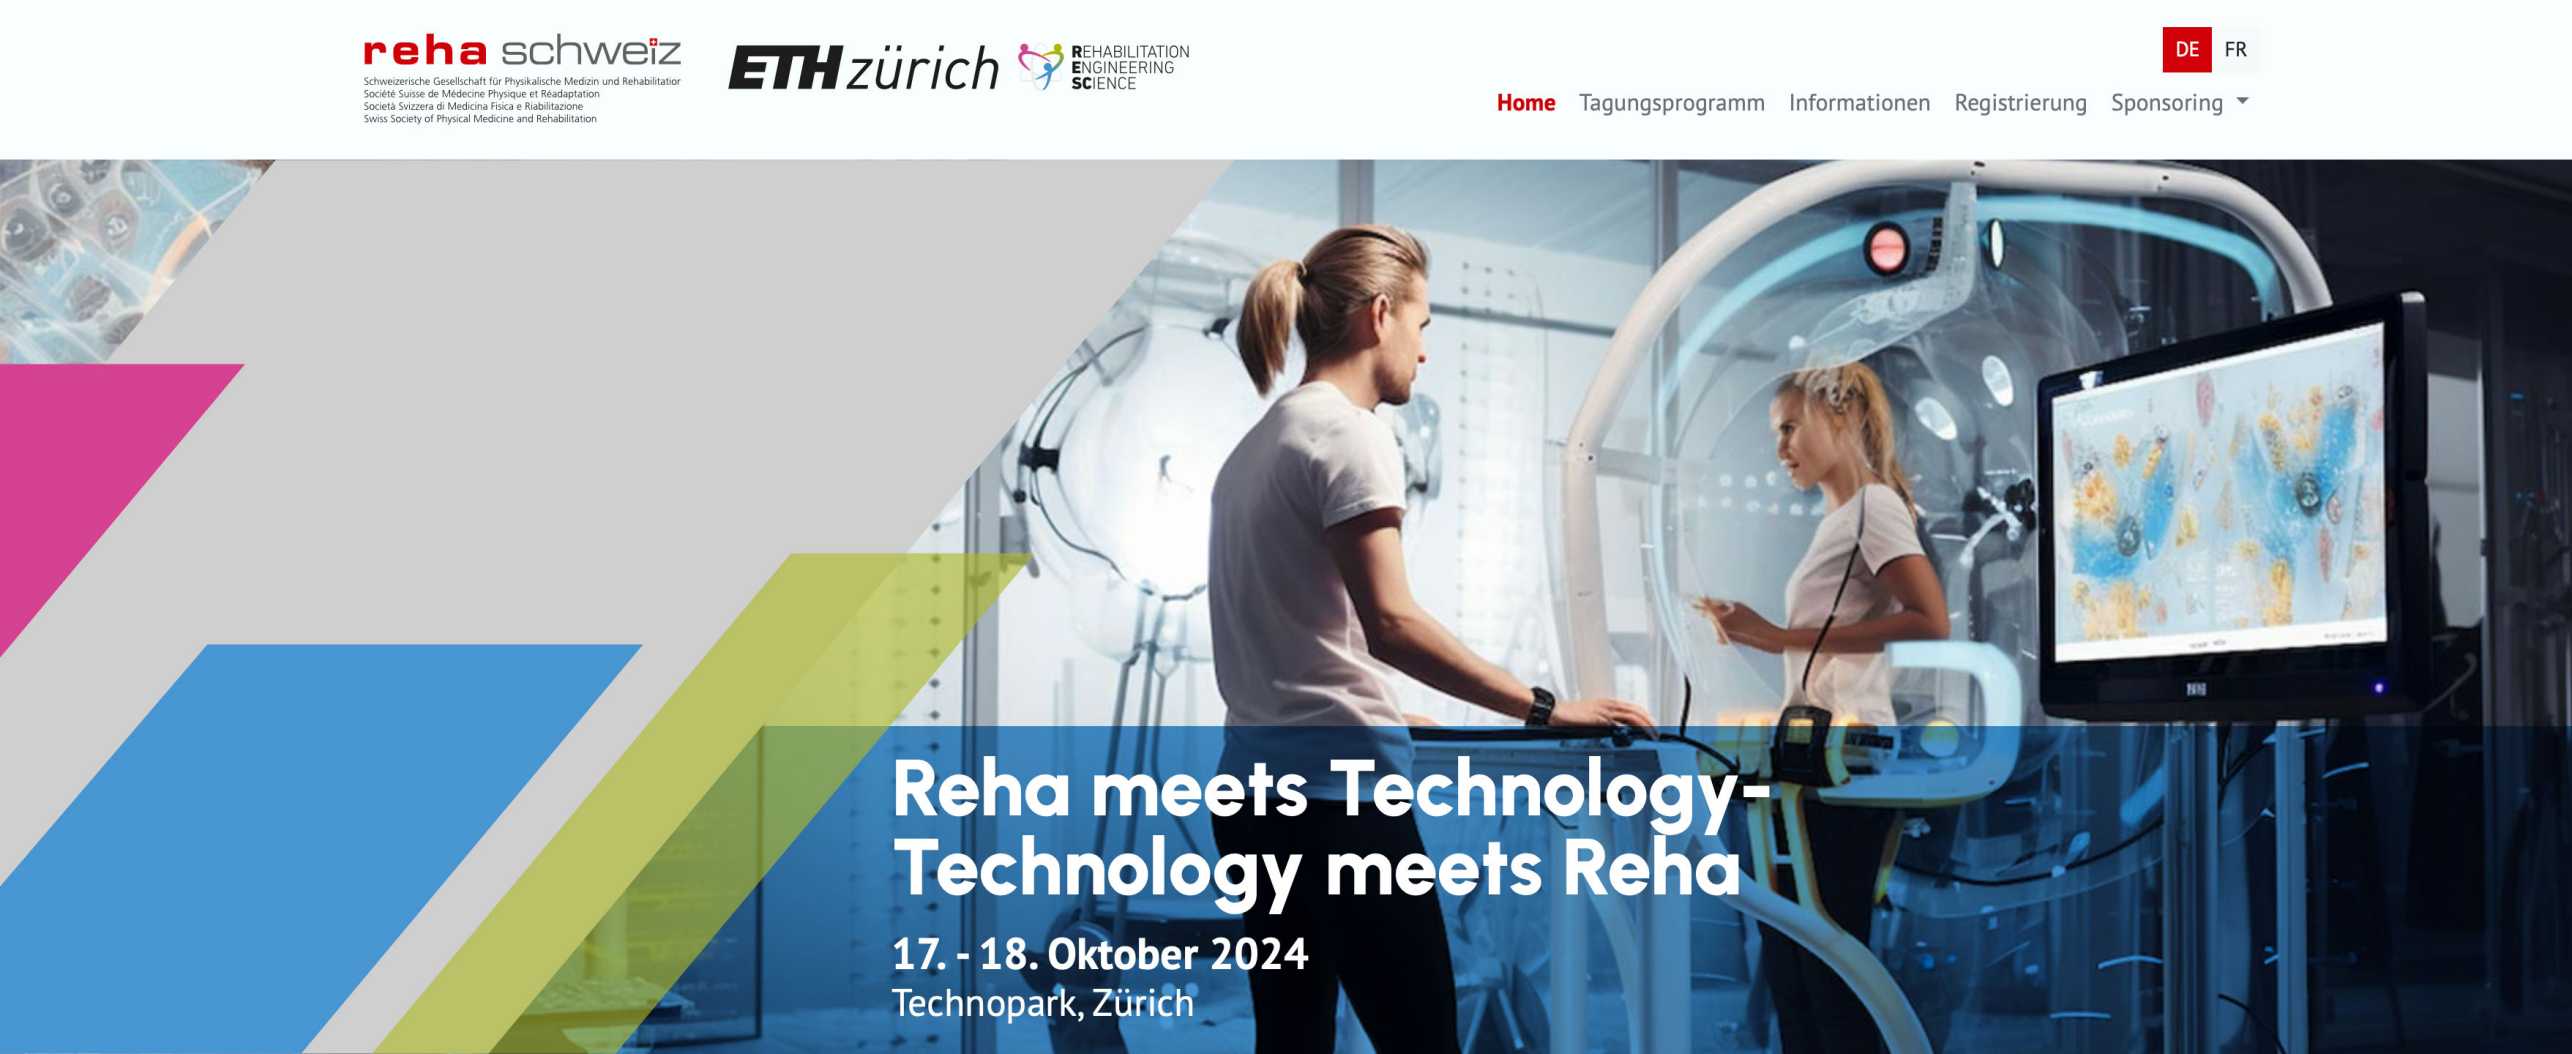 Enlarged view: Visual announcing the REHA Congress shows 2 people on fitness devices Text: Reha meets Technology- Technology meets Reha